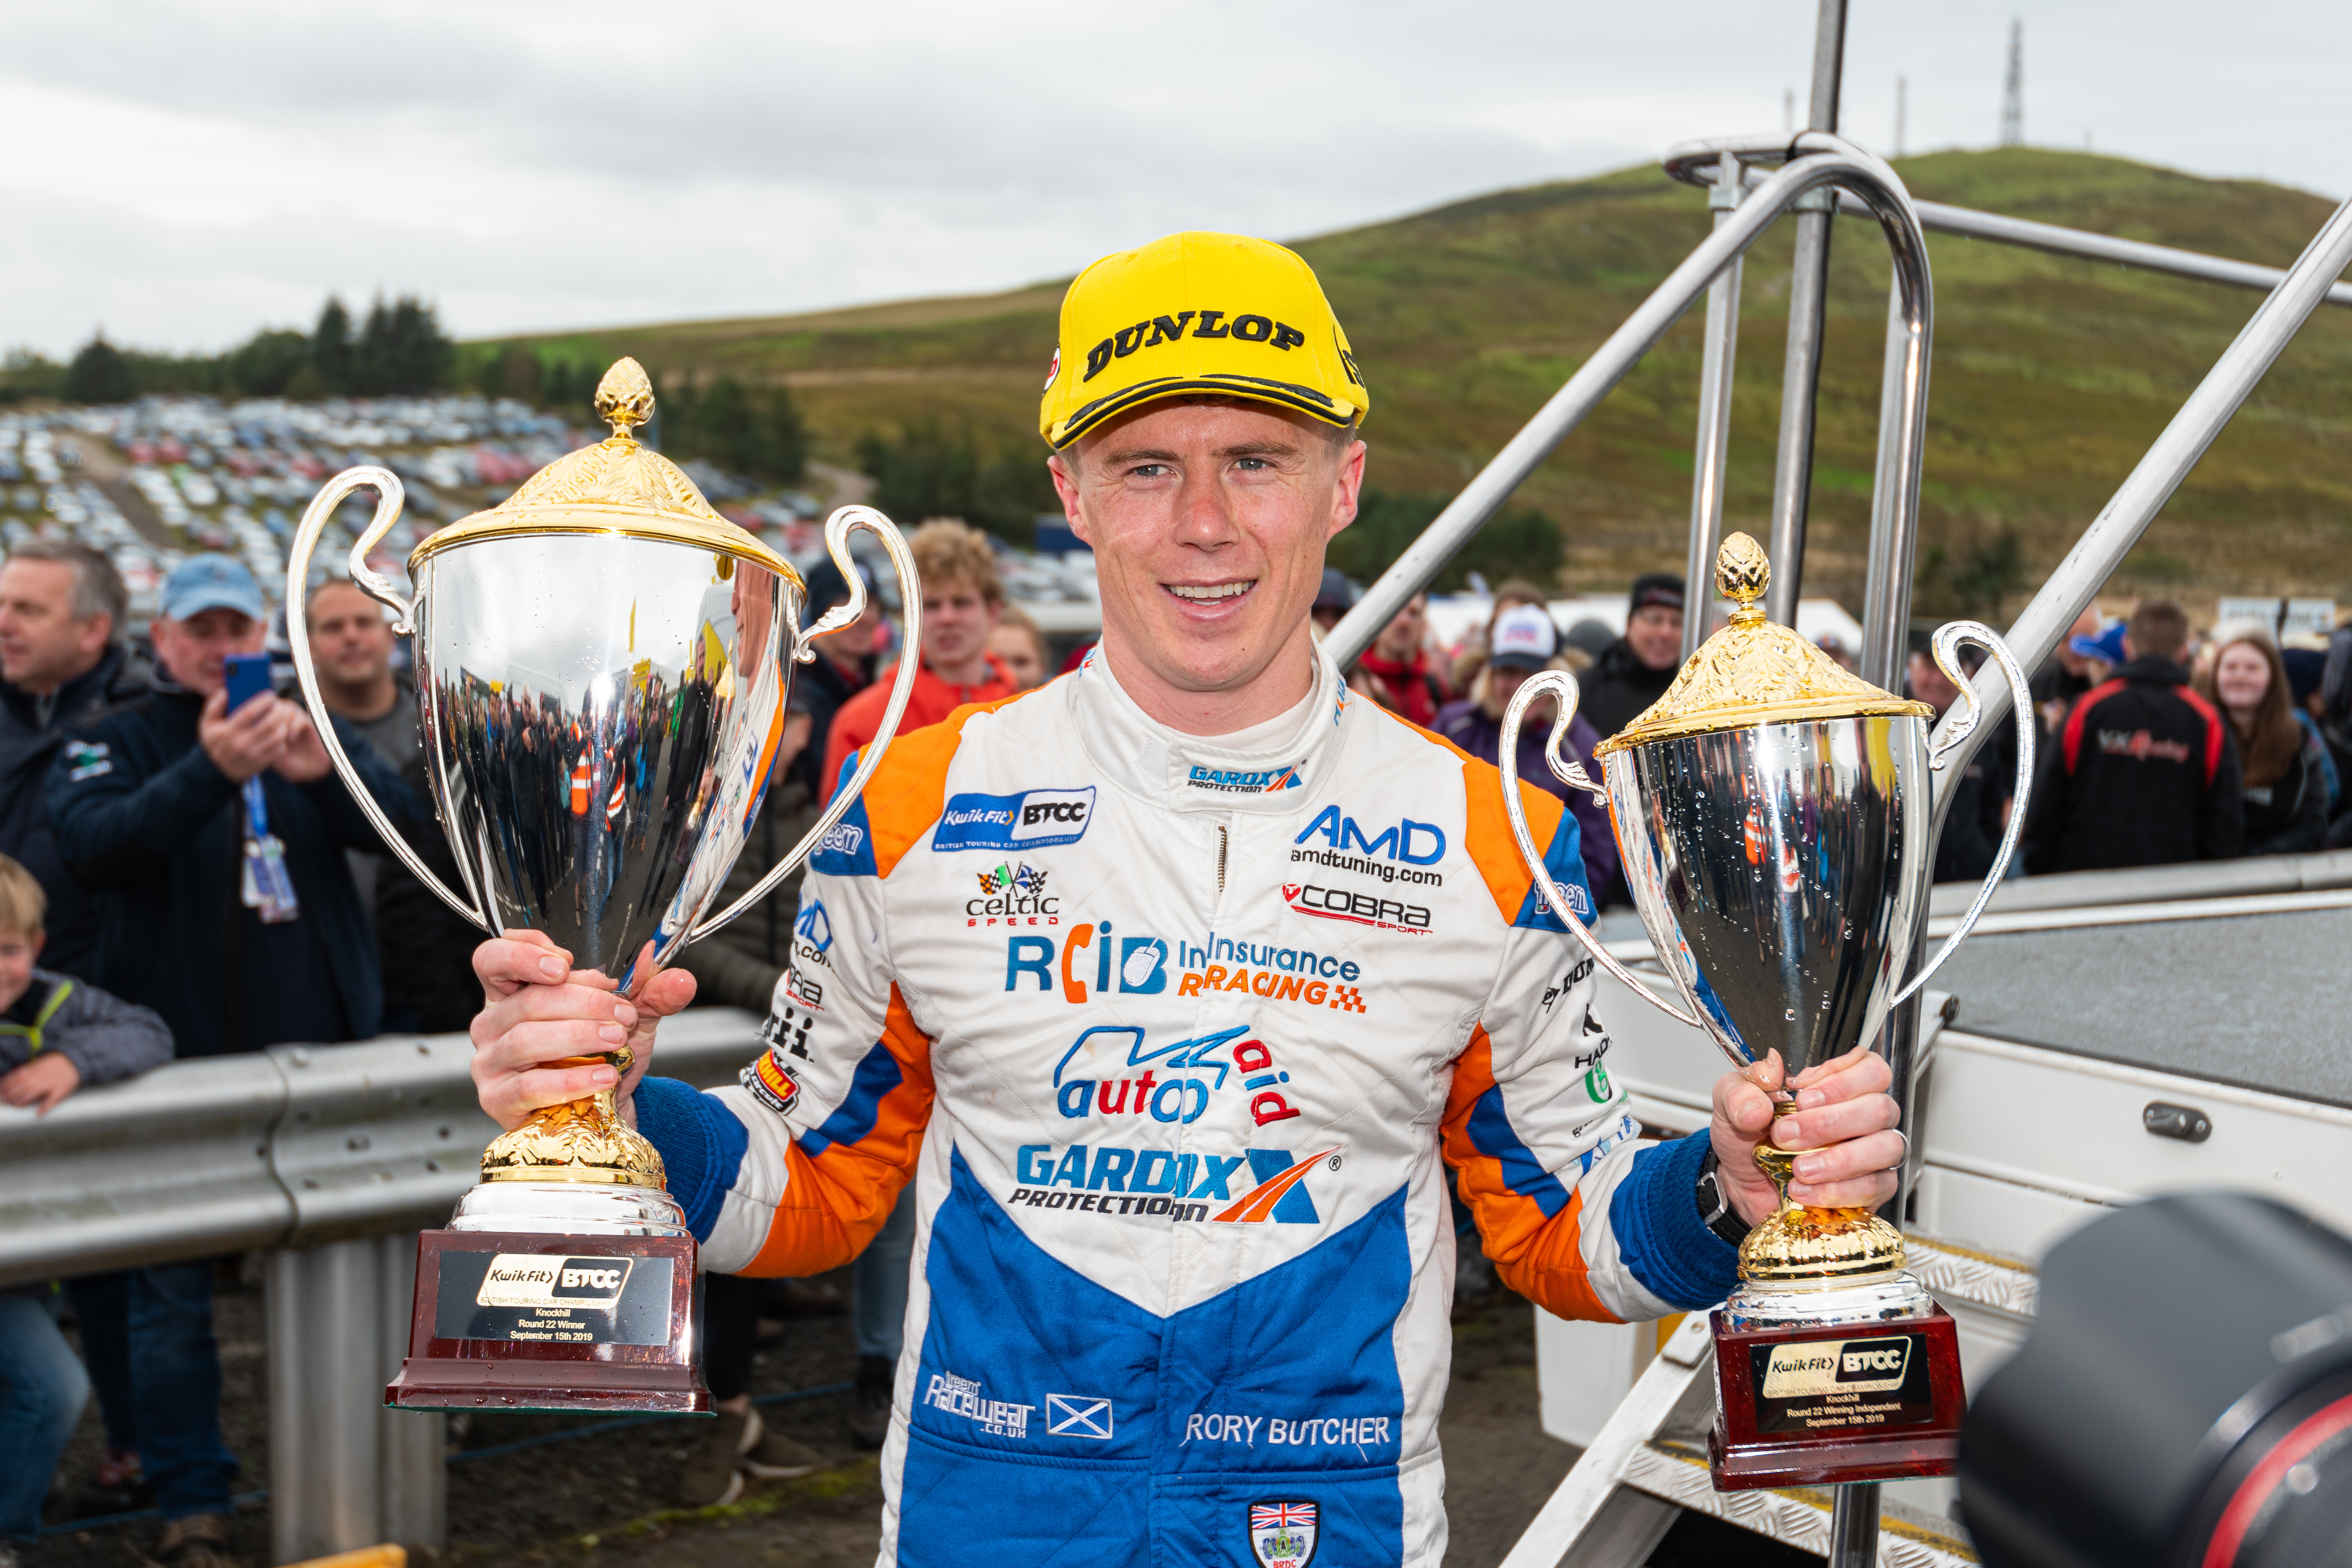 Rory Butcher was on winning form at his home Knockhill circuit in 2019.